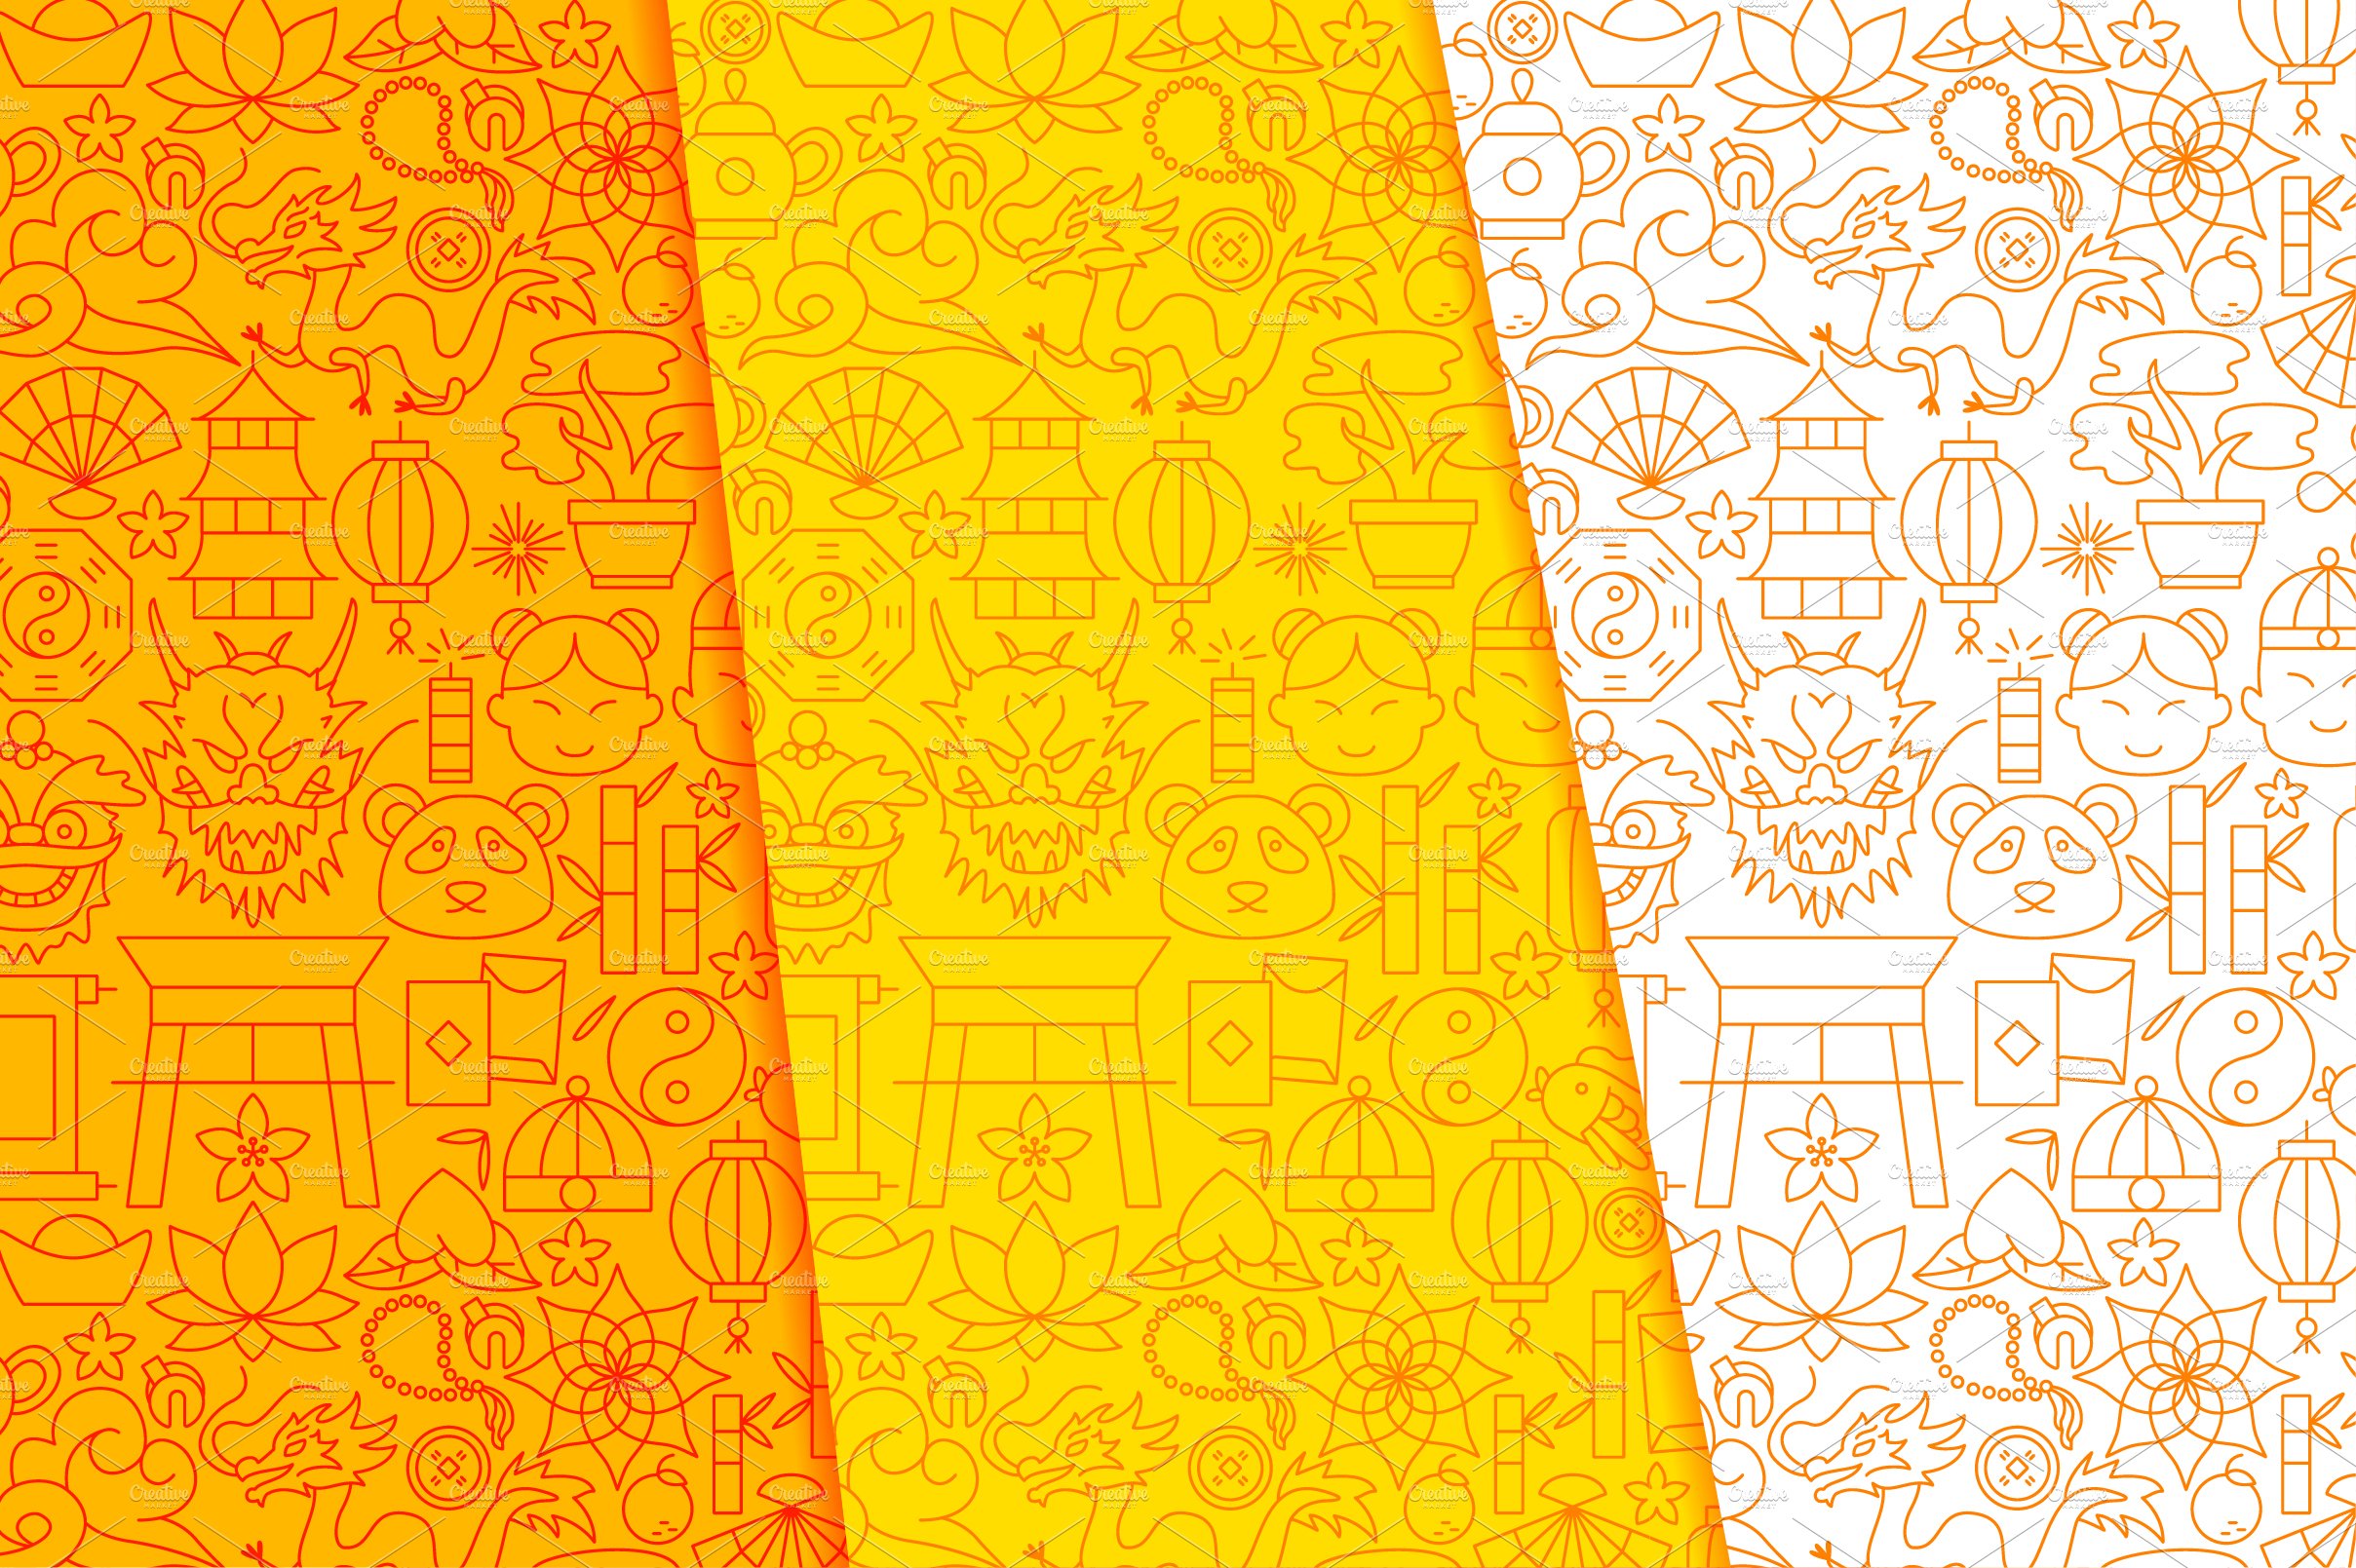 Orange and yellow patterns with Chinese New Year icons collection.